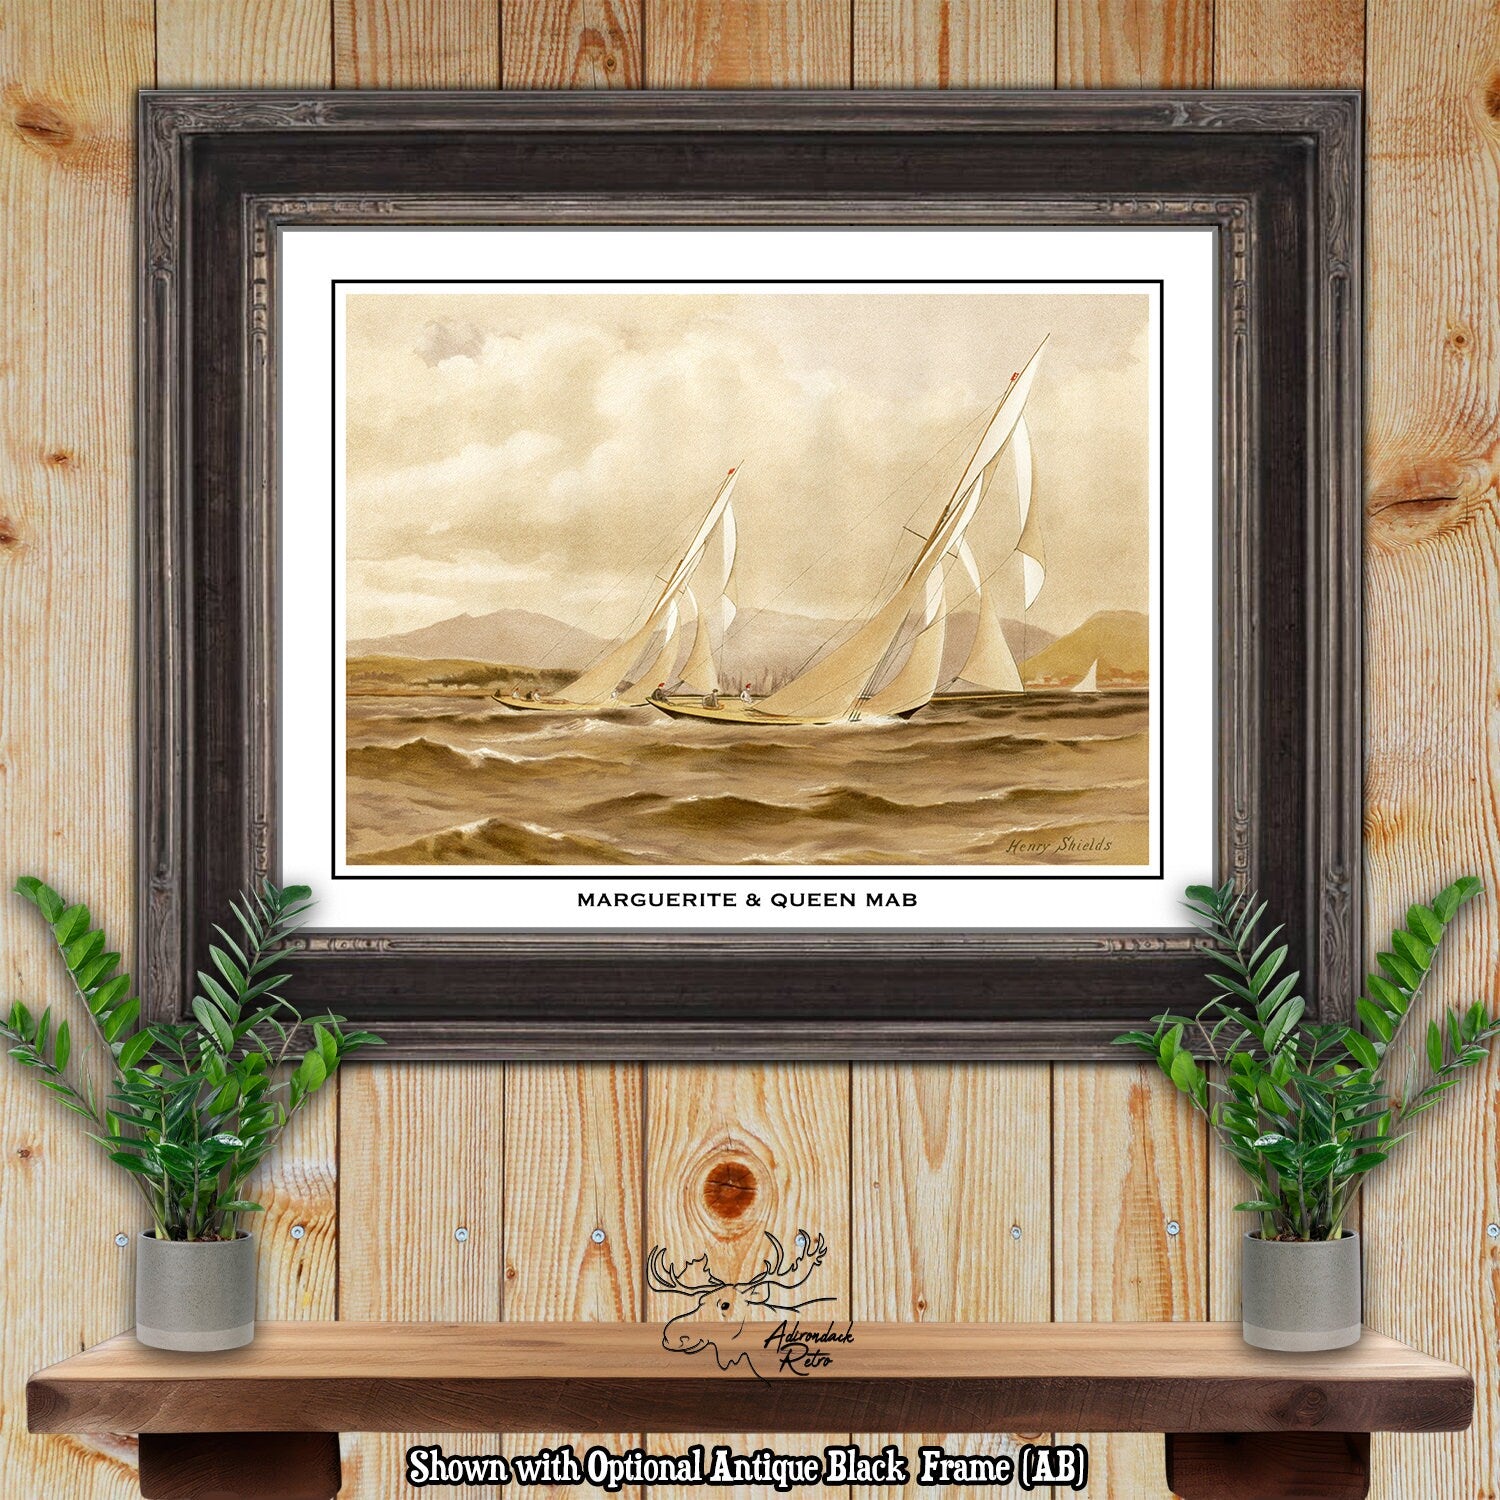 Clyde Yacht Marguerite and Queen Mab by Henry Shields Giclee Fine Art Print at Adirondack Retro